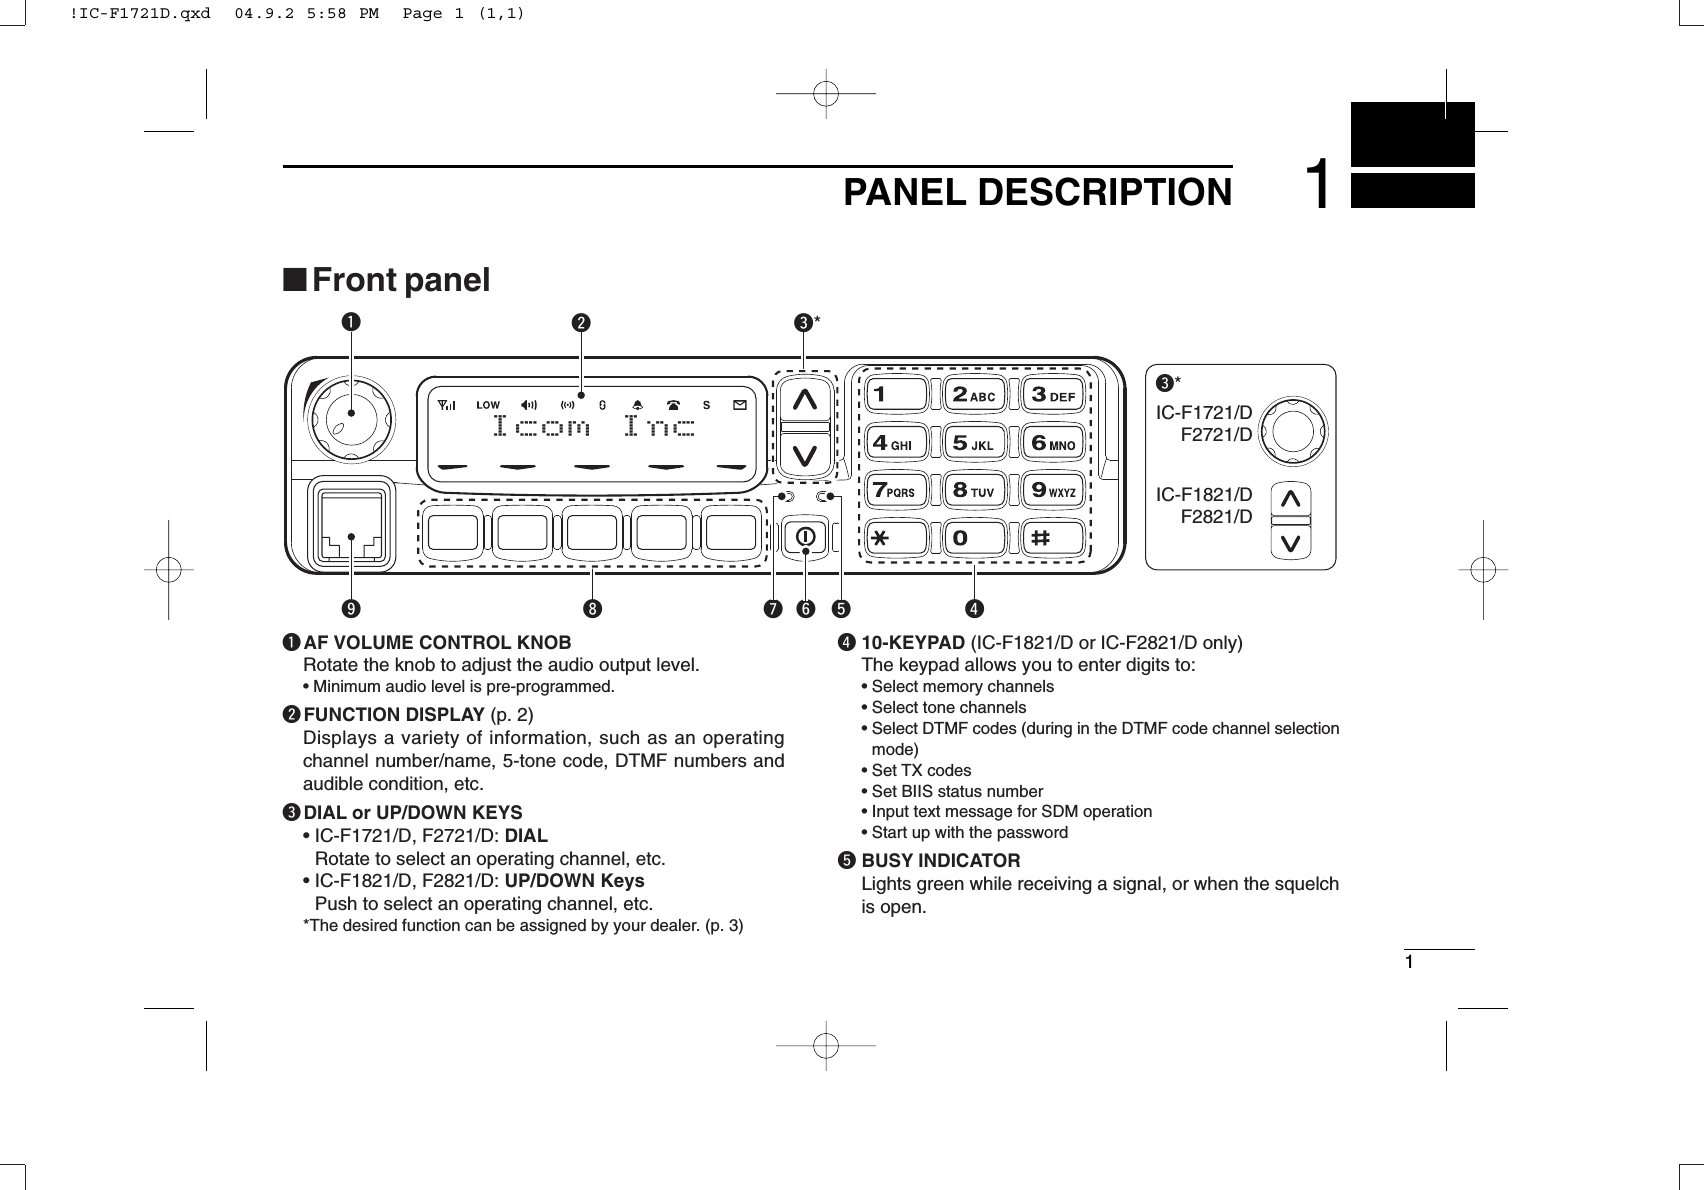 11PANEL DESCRIPTIONIcom Incyorutiqe*we*IC-F1721/DIC-F1821/DF2721/DF2821/D■Front panelqAF VOLUME CONTROL KNOBRotate the knob to adjust the audio output level.• Minimum audio level is pre-programmed.wFUNCTION DISPLAY (p. 2)Displays a variety of information, such as an operatingchannel number/name, 5-tone code, DTMF numbers andaudible condition, etc.eDIAL or UP/DOWN KEYS• IC-F1721/D, F2721/D: DIALRotate to select an operating channel, etc.• IC-F1821/D, F2821/D: UP/DOWN KeysPush to select an operating channel, etc.*The desired function can be assigned by your dealer. (p. 3)r10-KEYPAD (IC-F1821/D or IC-F2821/D only)The keypad allows you to enter digits to:• Select memory channels• Select tone channels• Select DTMF codes (during in the DTMF code channel selectionmode)• Set TX codes• Set BIIS status number• Input text message for SDM operation• Start up with the passwordtBUSY INDICATORLights green while receiving a signal, or when the squelchis open.!IC-F1721D.qxd  04.9.2 5:58 PM  Page 1 (1,1)